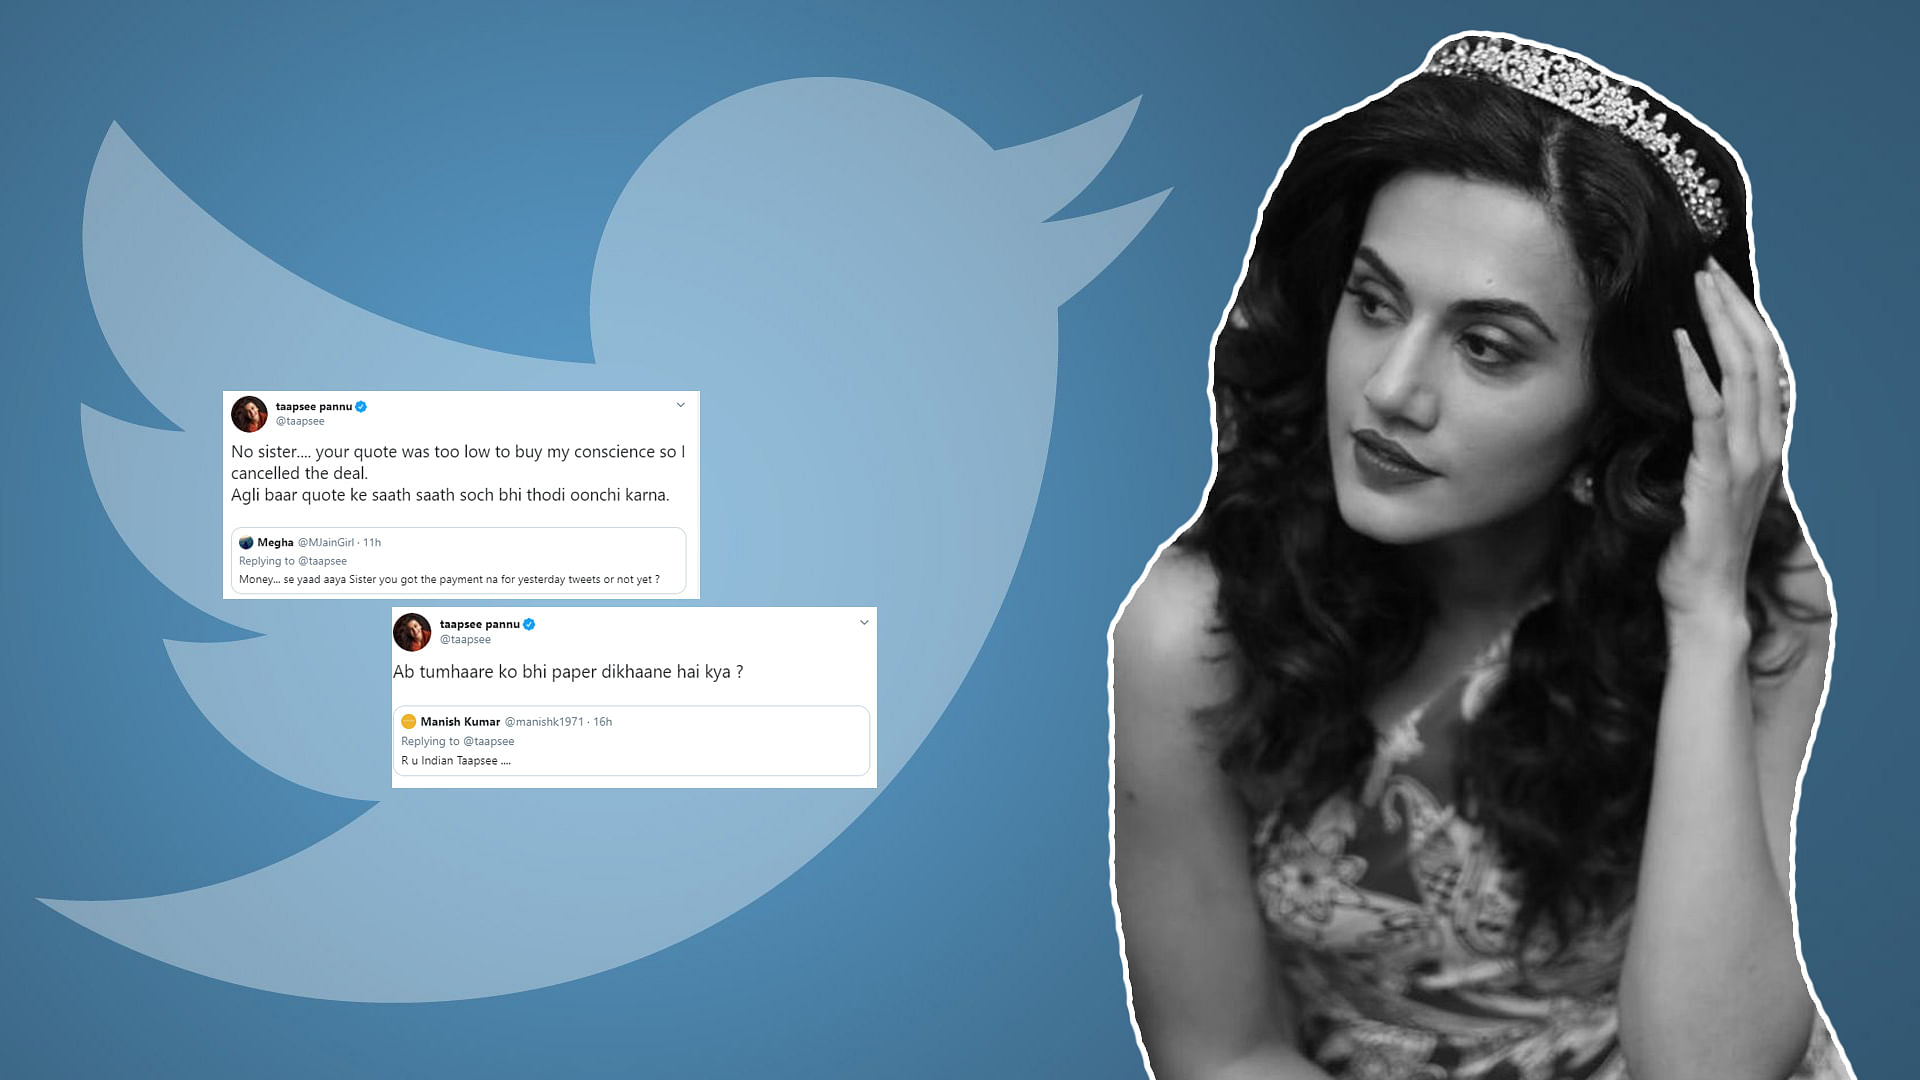 Taapsee Pannu has a response for everyone!